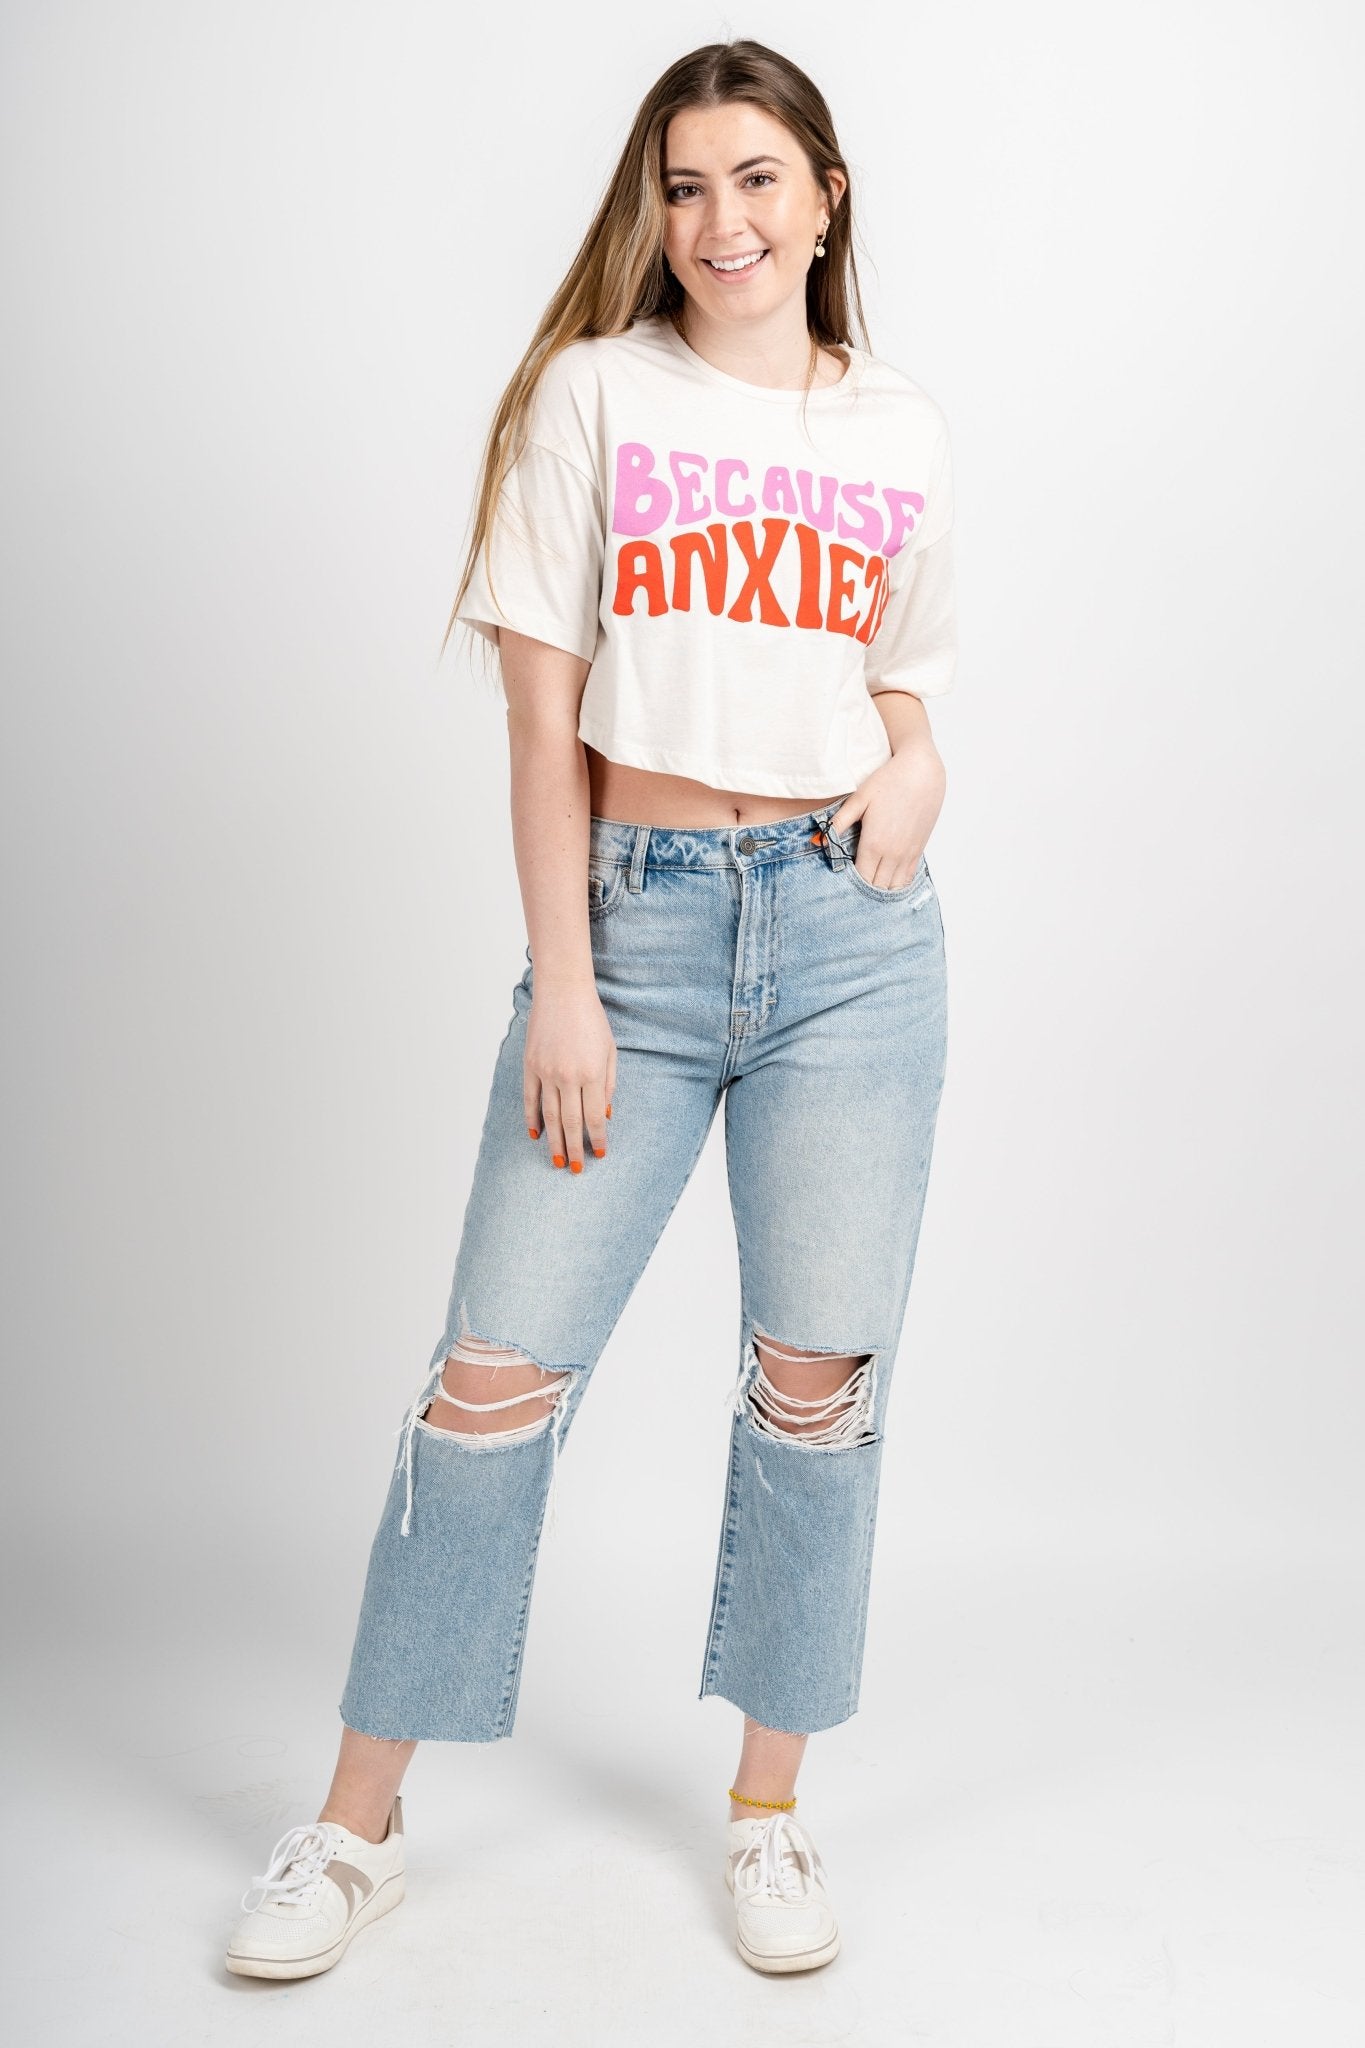 Because anxiety crop tee white - Trendy T-shirts - Cute Graphic Tee Fashion at Lush Fashion Lounge Boutique in Oklahoma